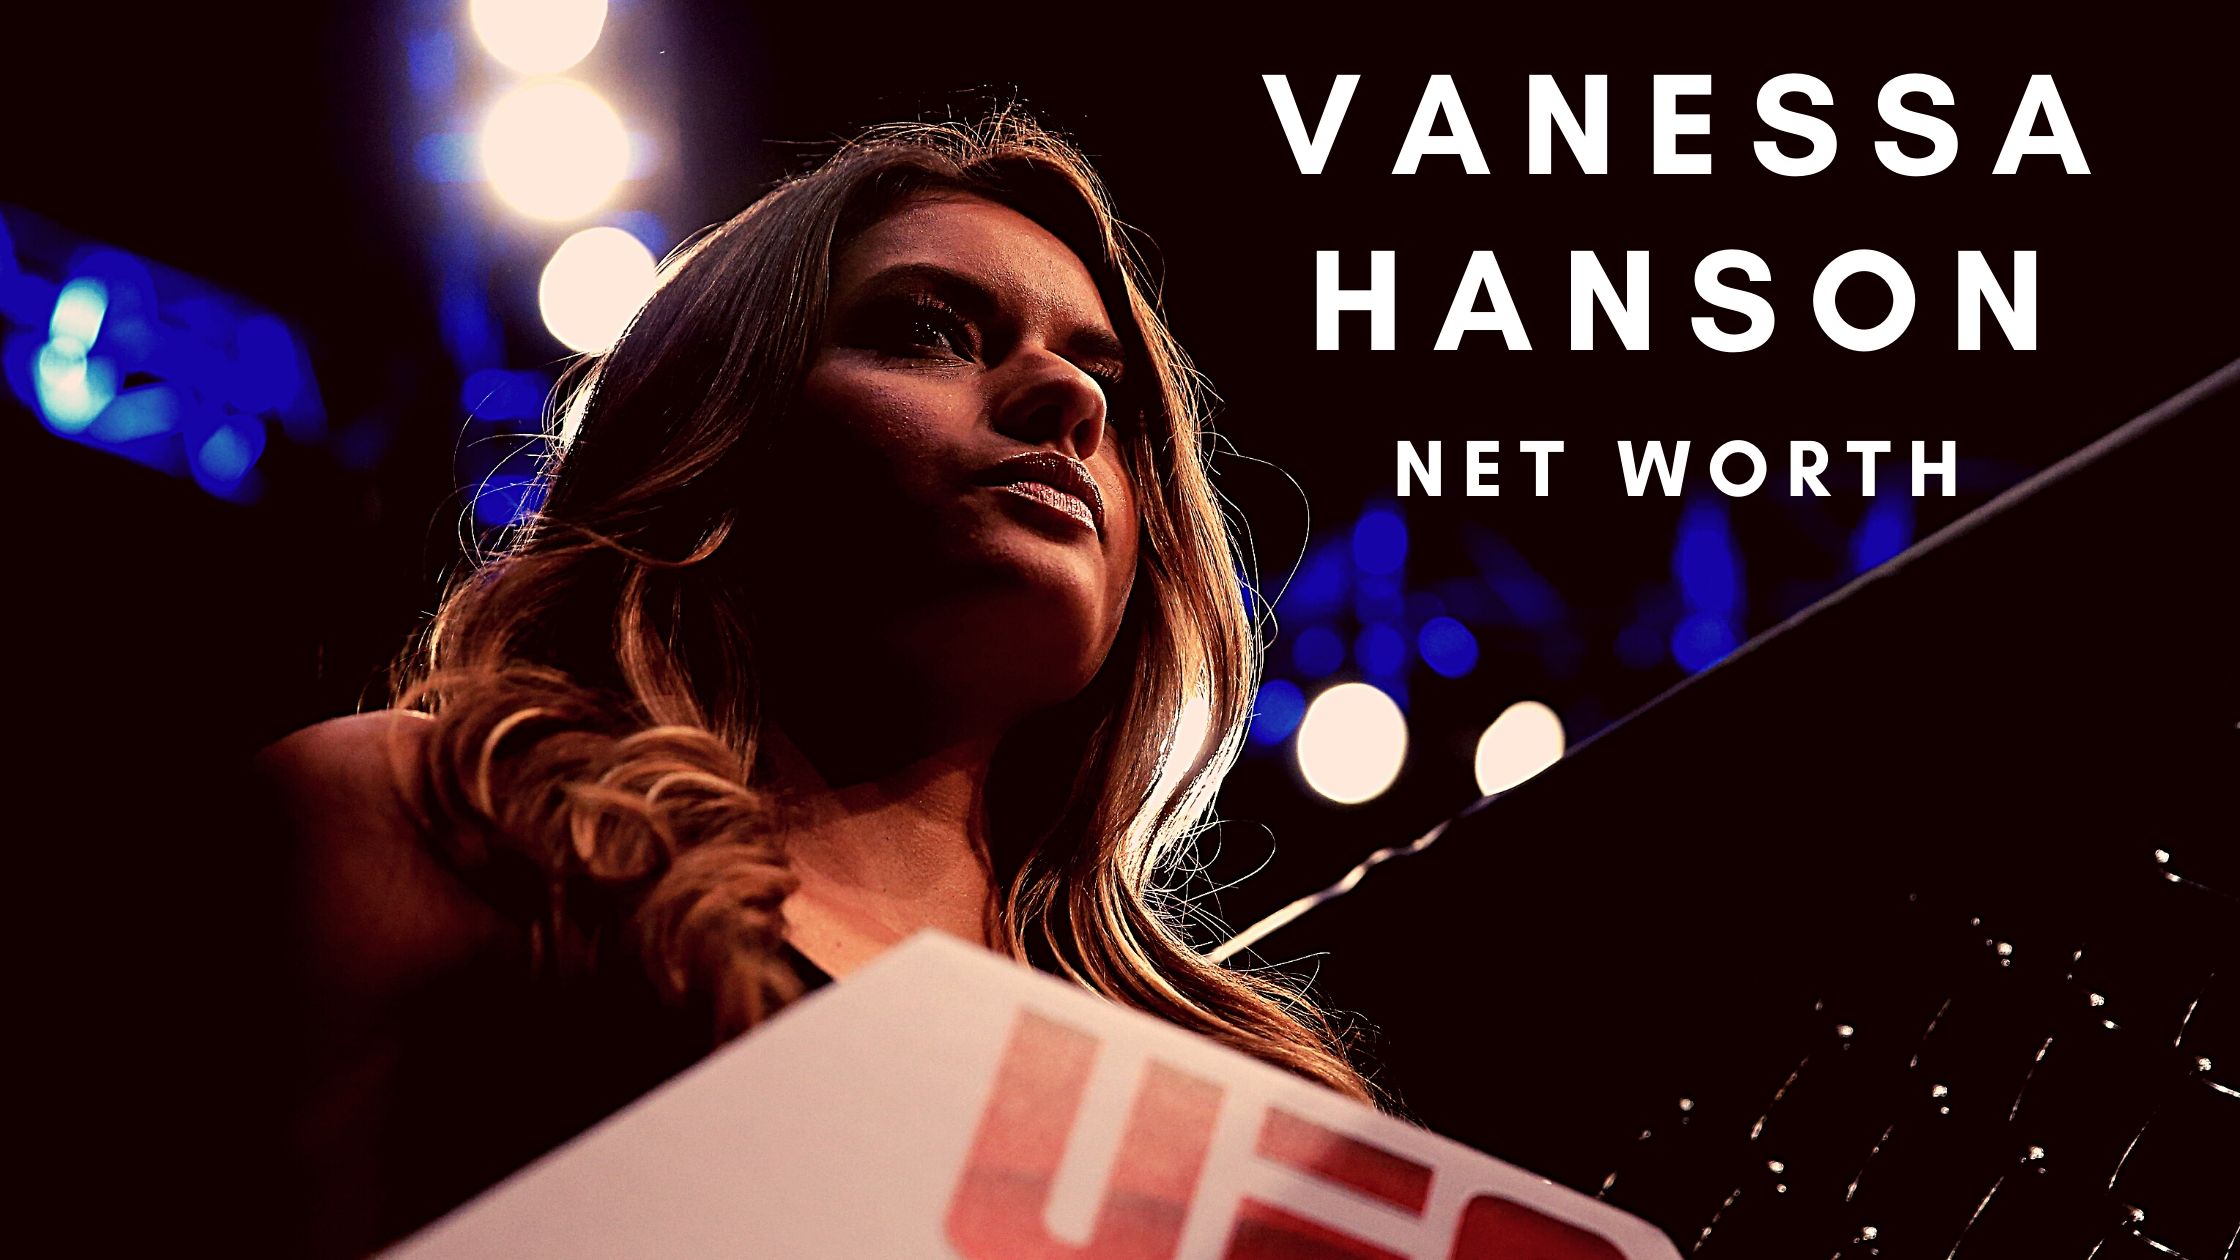 Vanessa Hanson has earned a decent net worth thanks to her MMA and modelling days